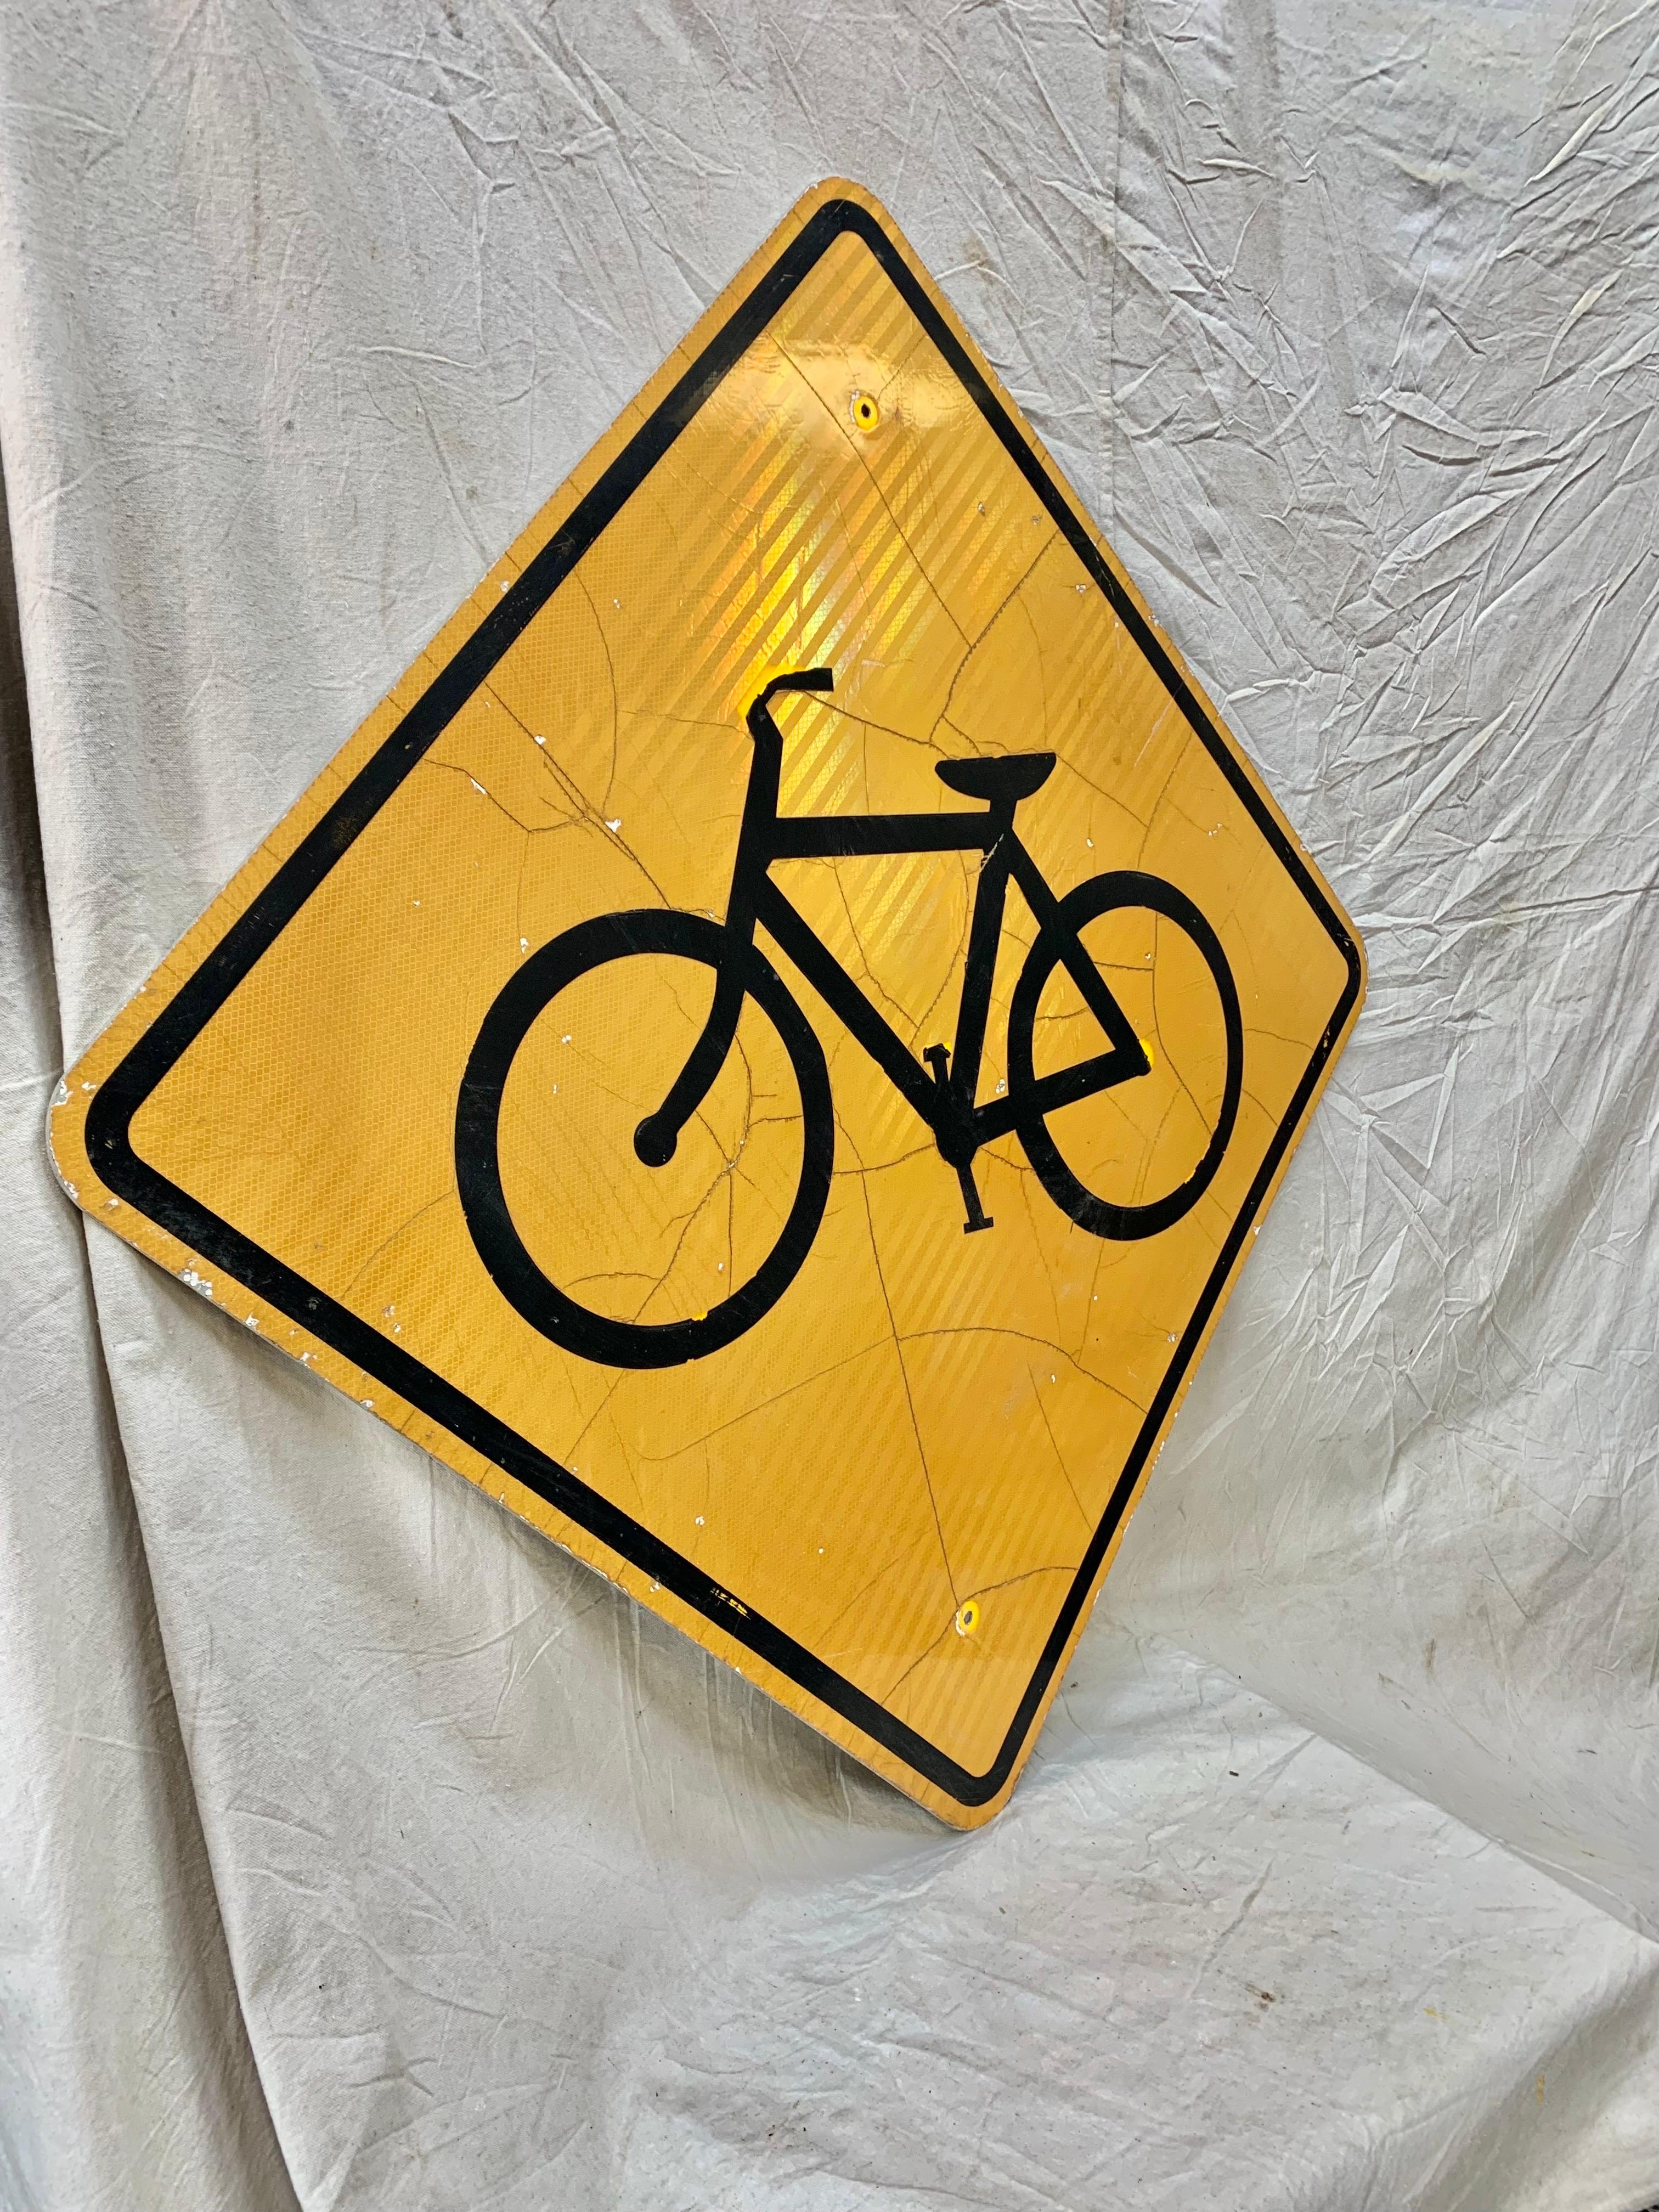 This Vintage Reflective Road Sign depicts a black bicycle with a yellow background. Once used as a street sign to inform motorist of bicyclists in the area, this sign presents great coloring, subject matter and patina. Today these vintage signs are